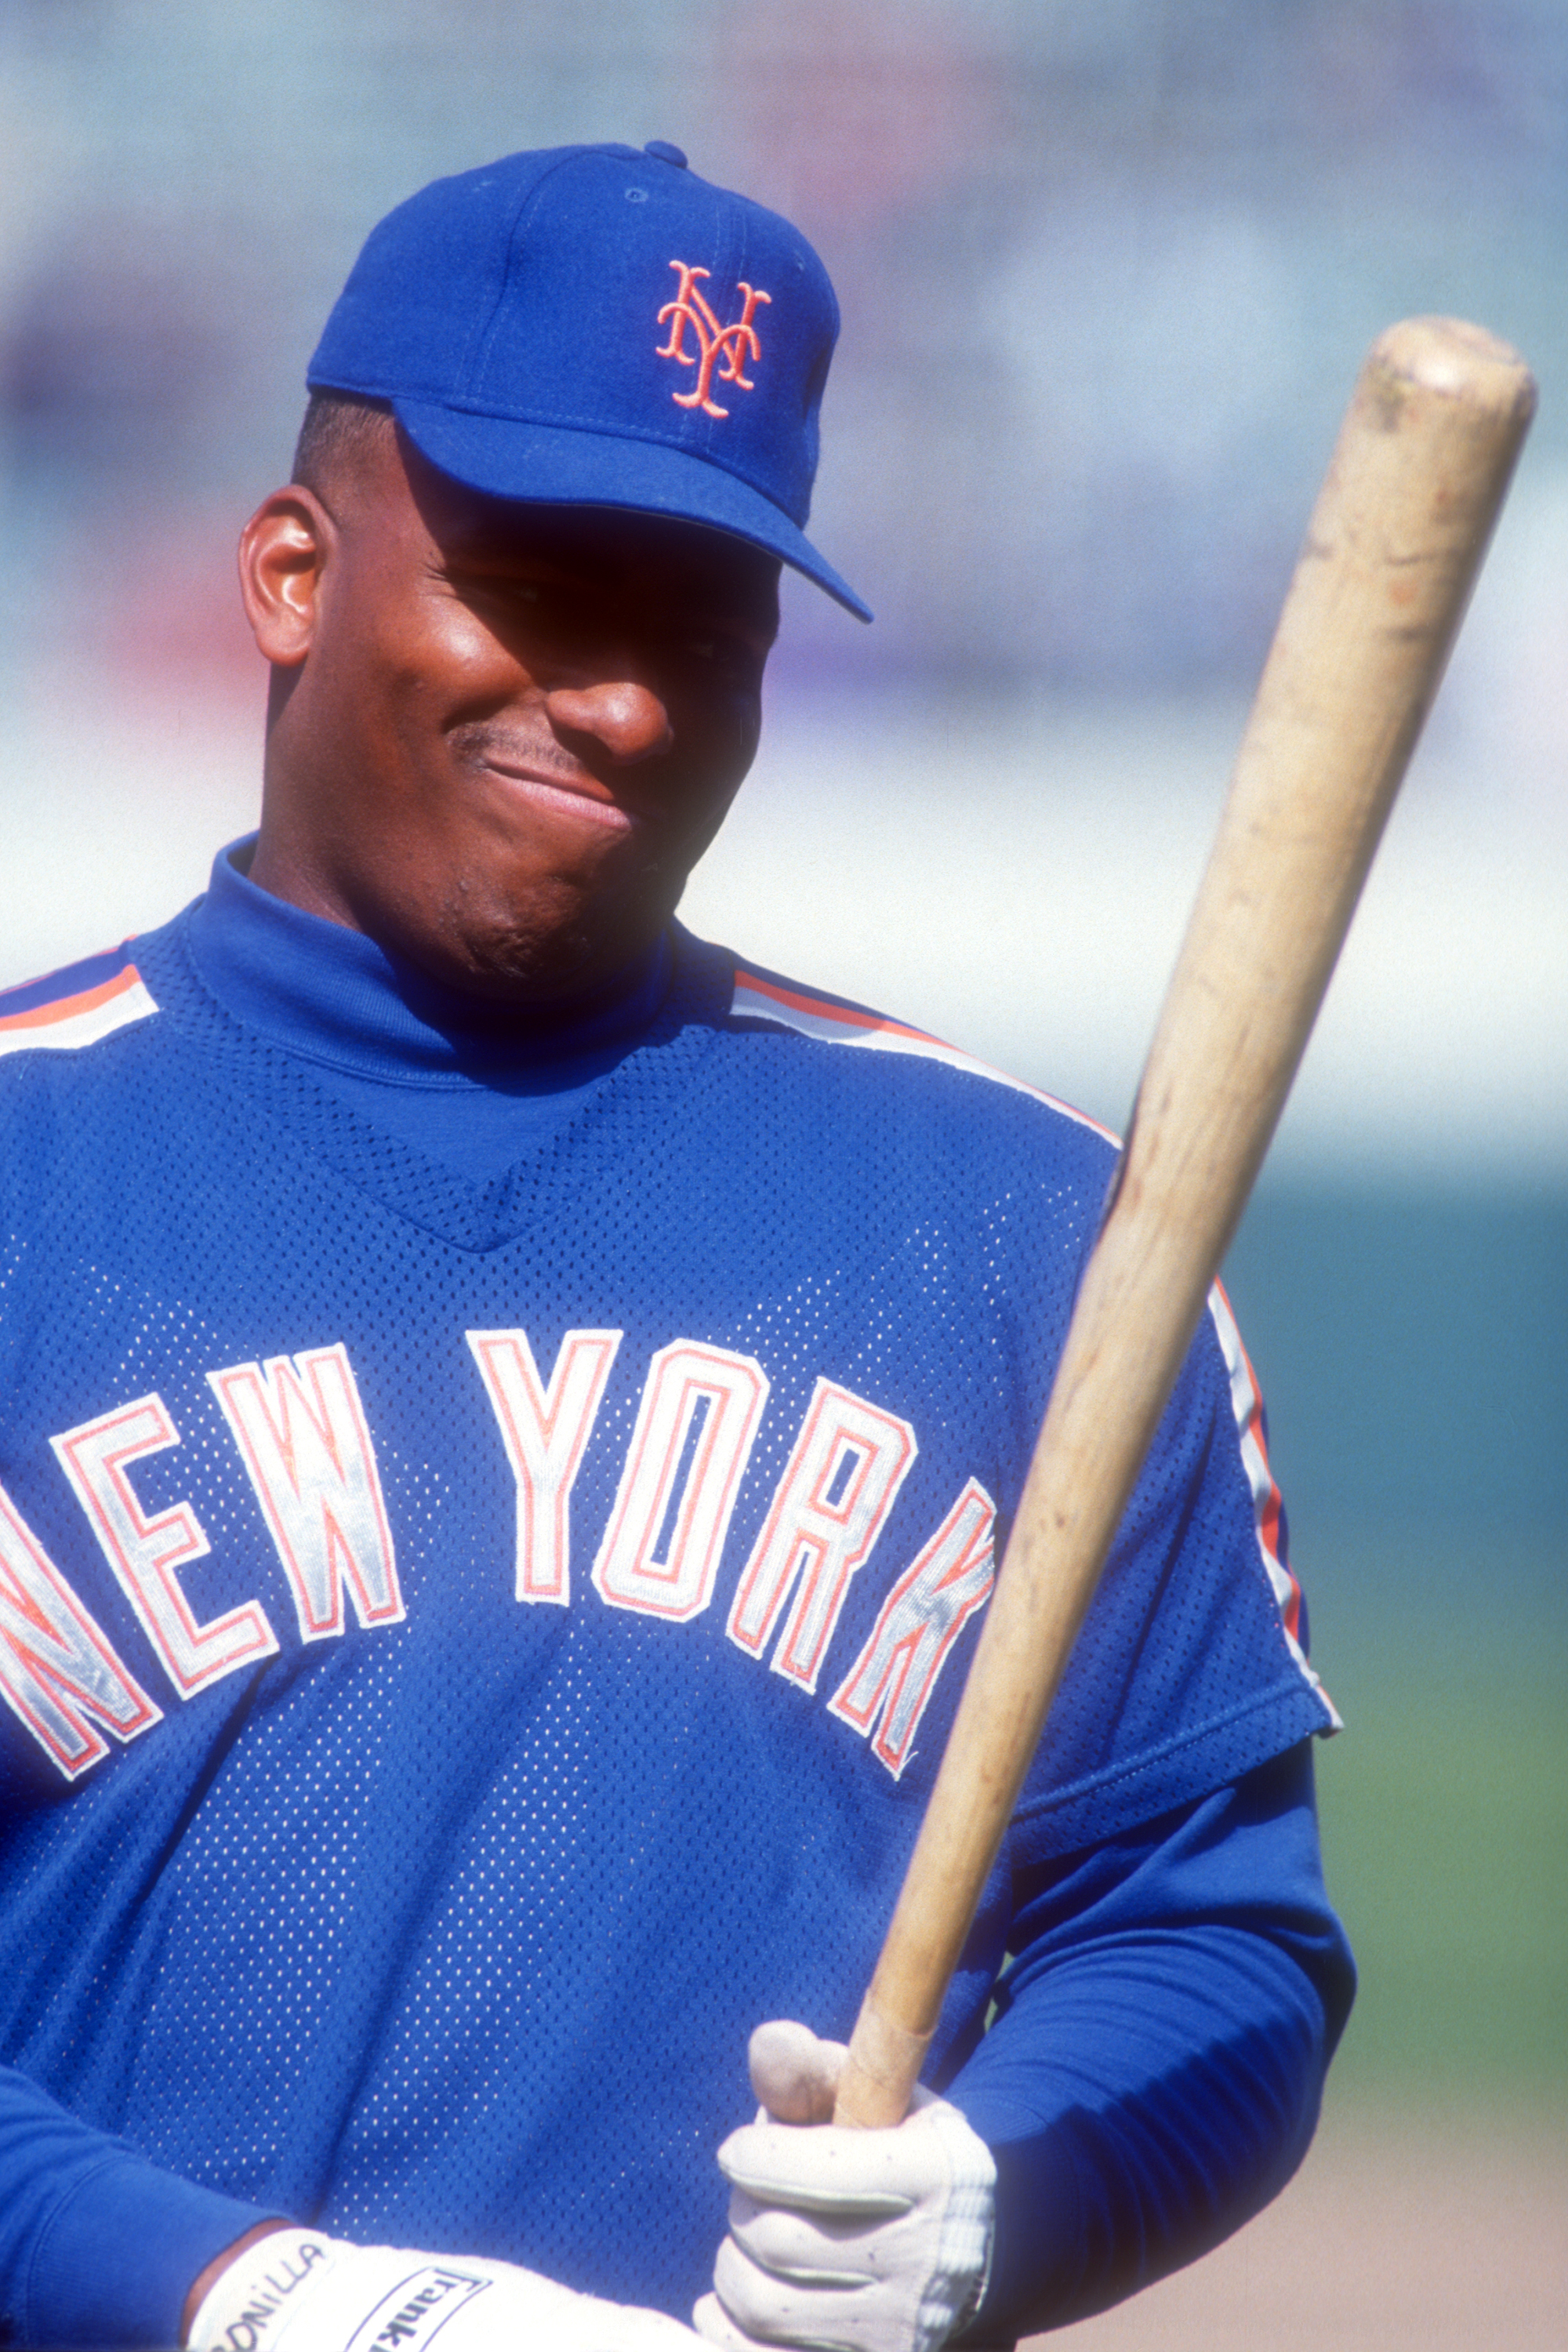 Bobby Bonilla Day: What You Do If You Were Paid 1.2 Million Every